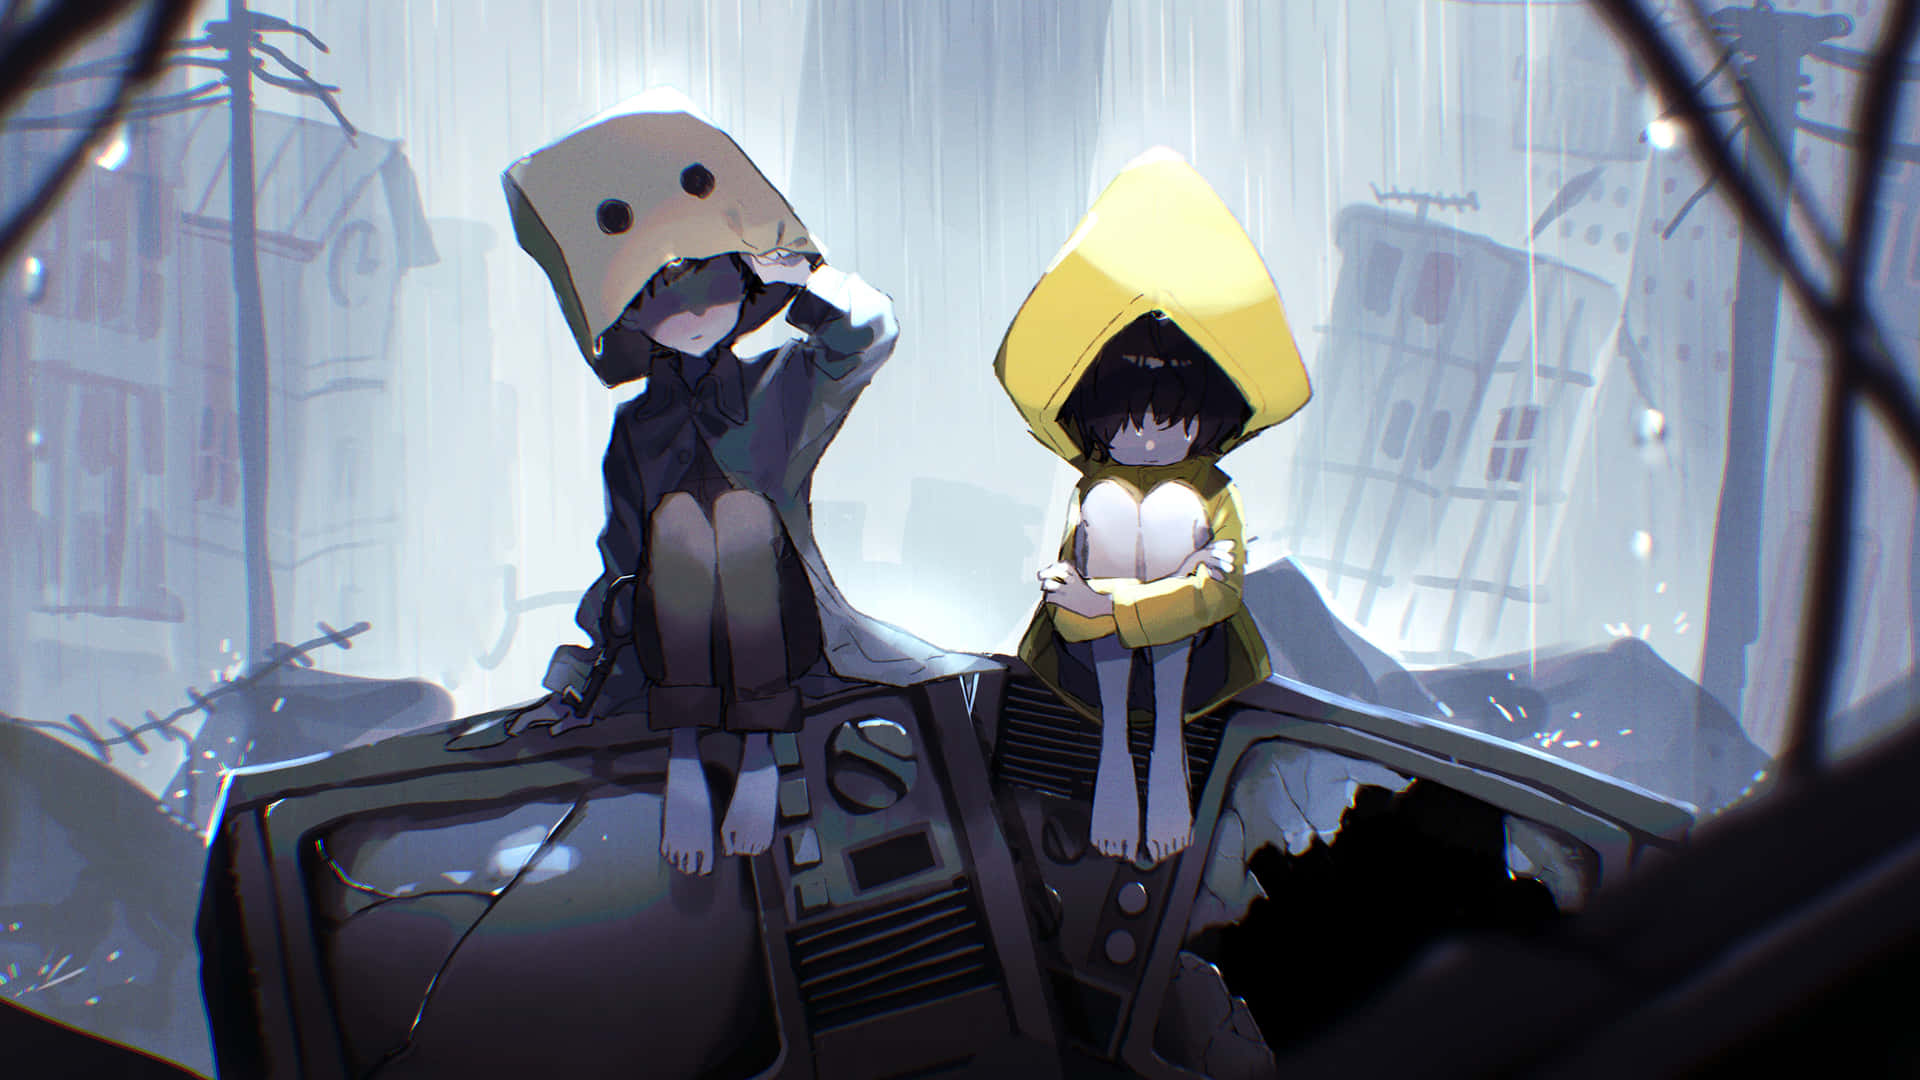 Anime Mono And Six From Little Nightmares 4k Wallpaper